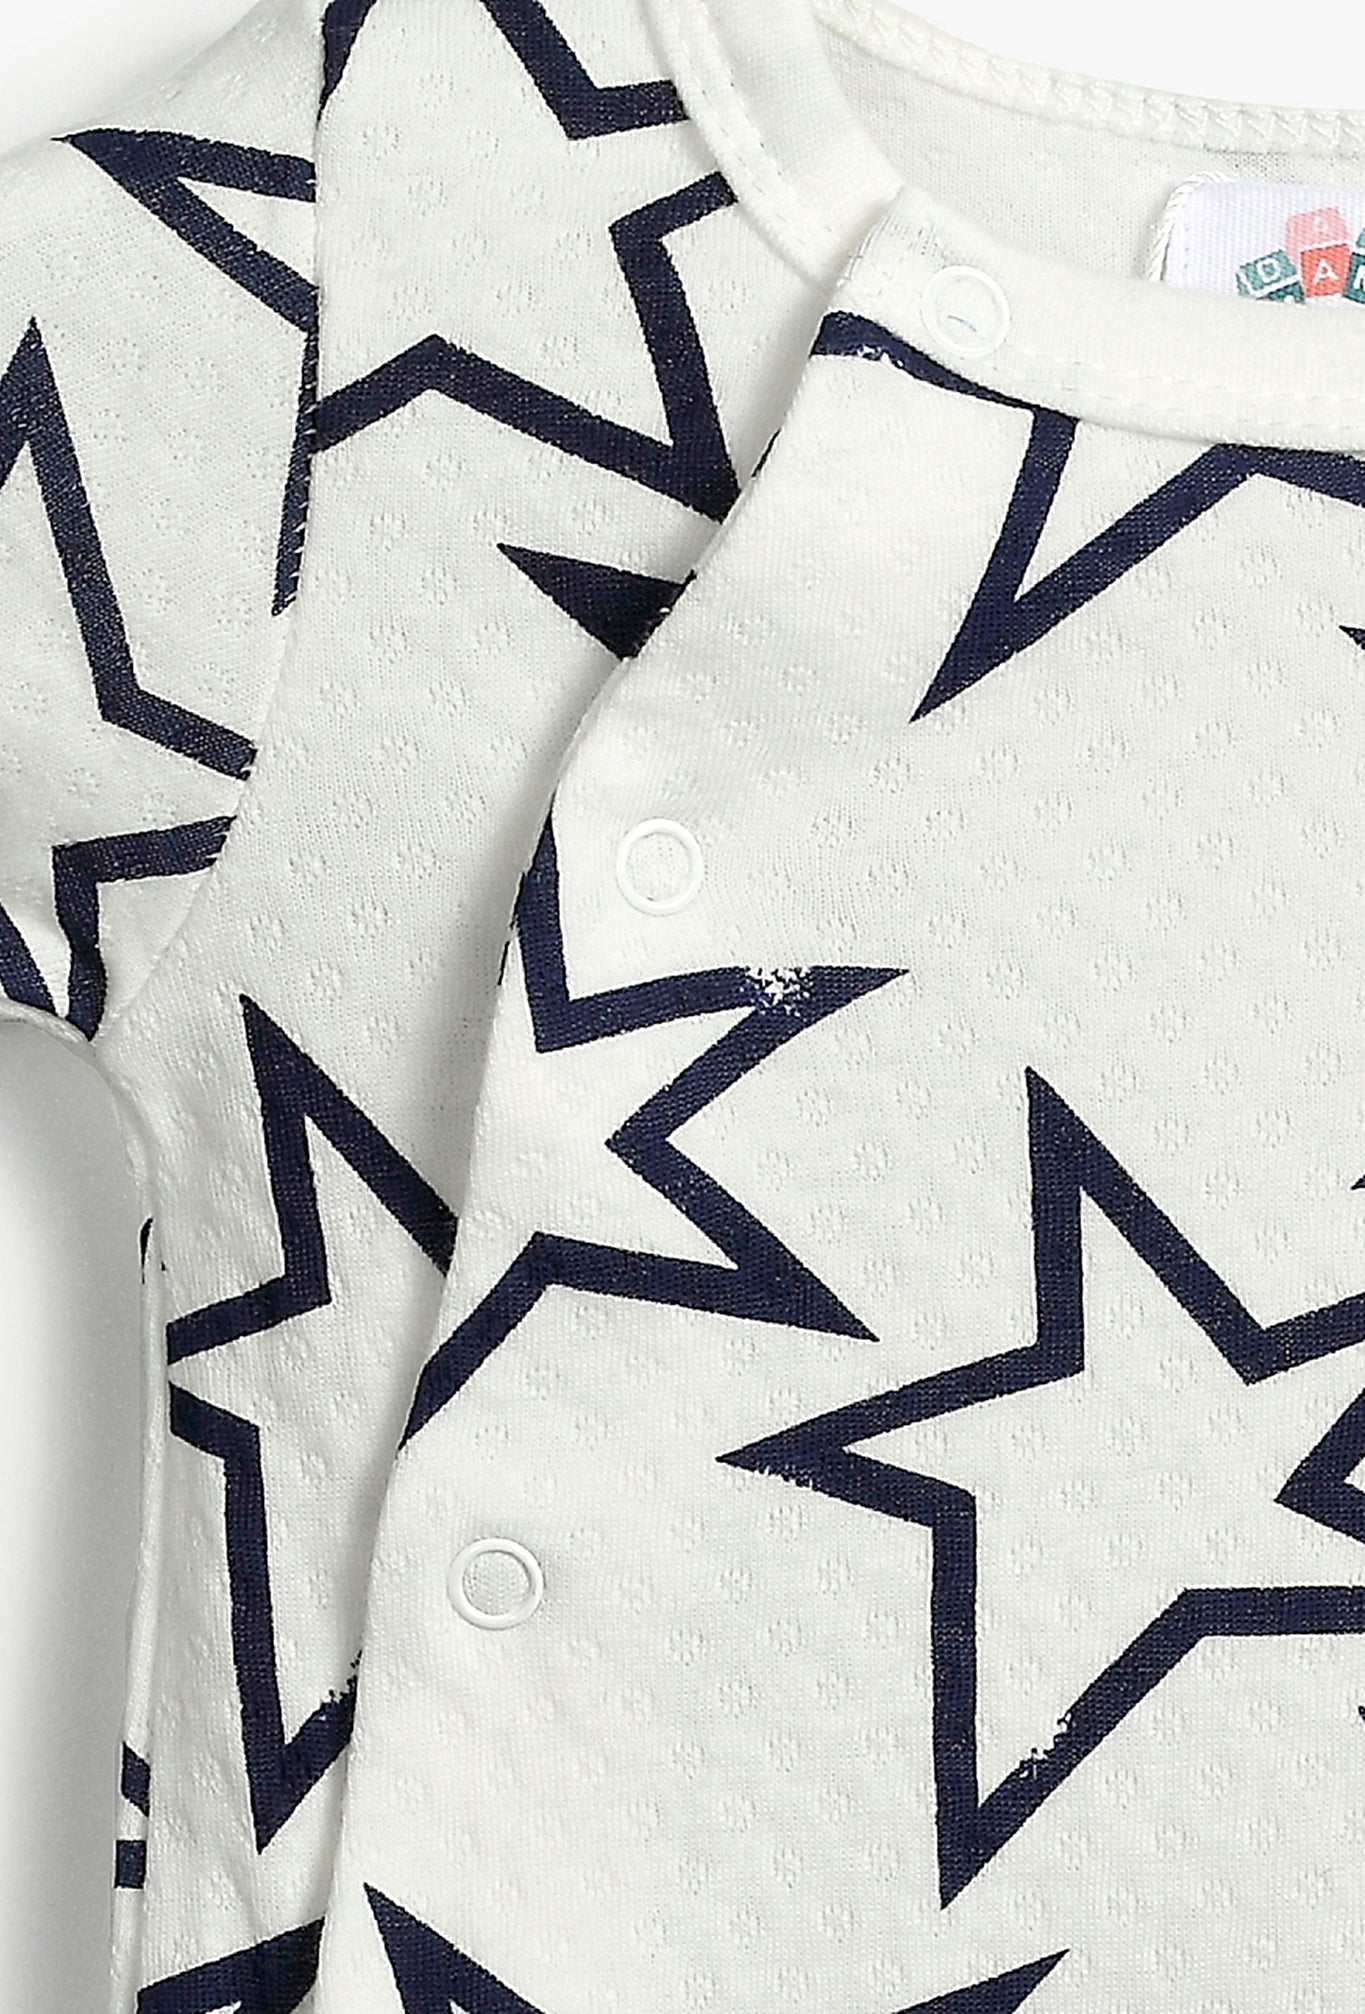 Stars Printed White Onesie for Baby Boy and Baby Girl